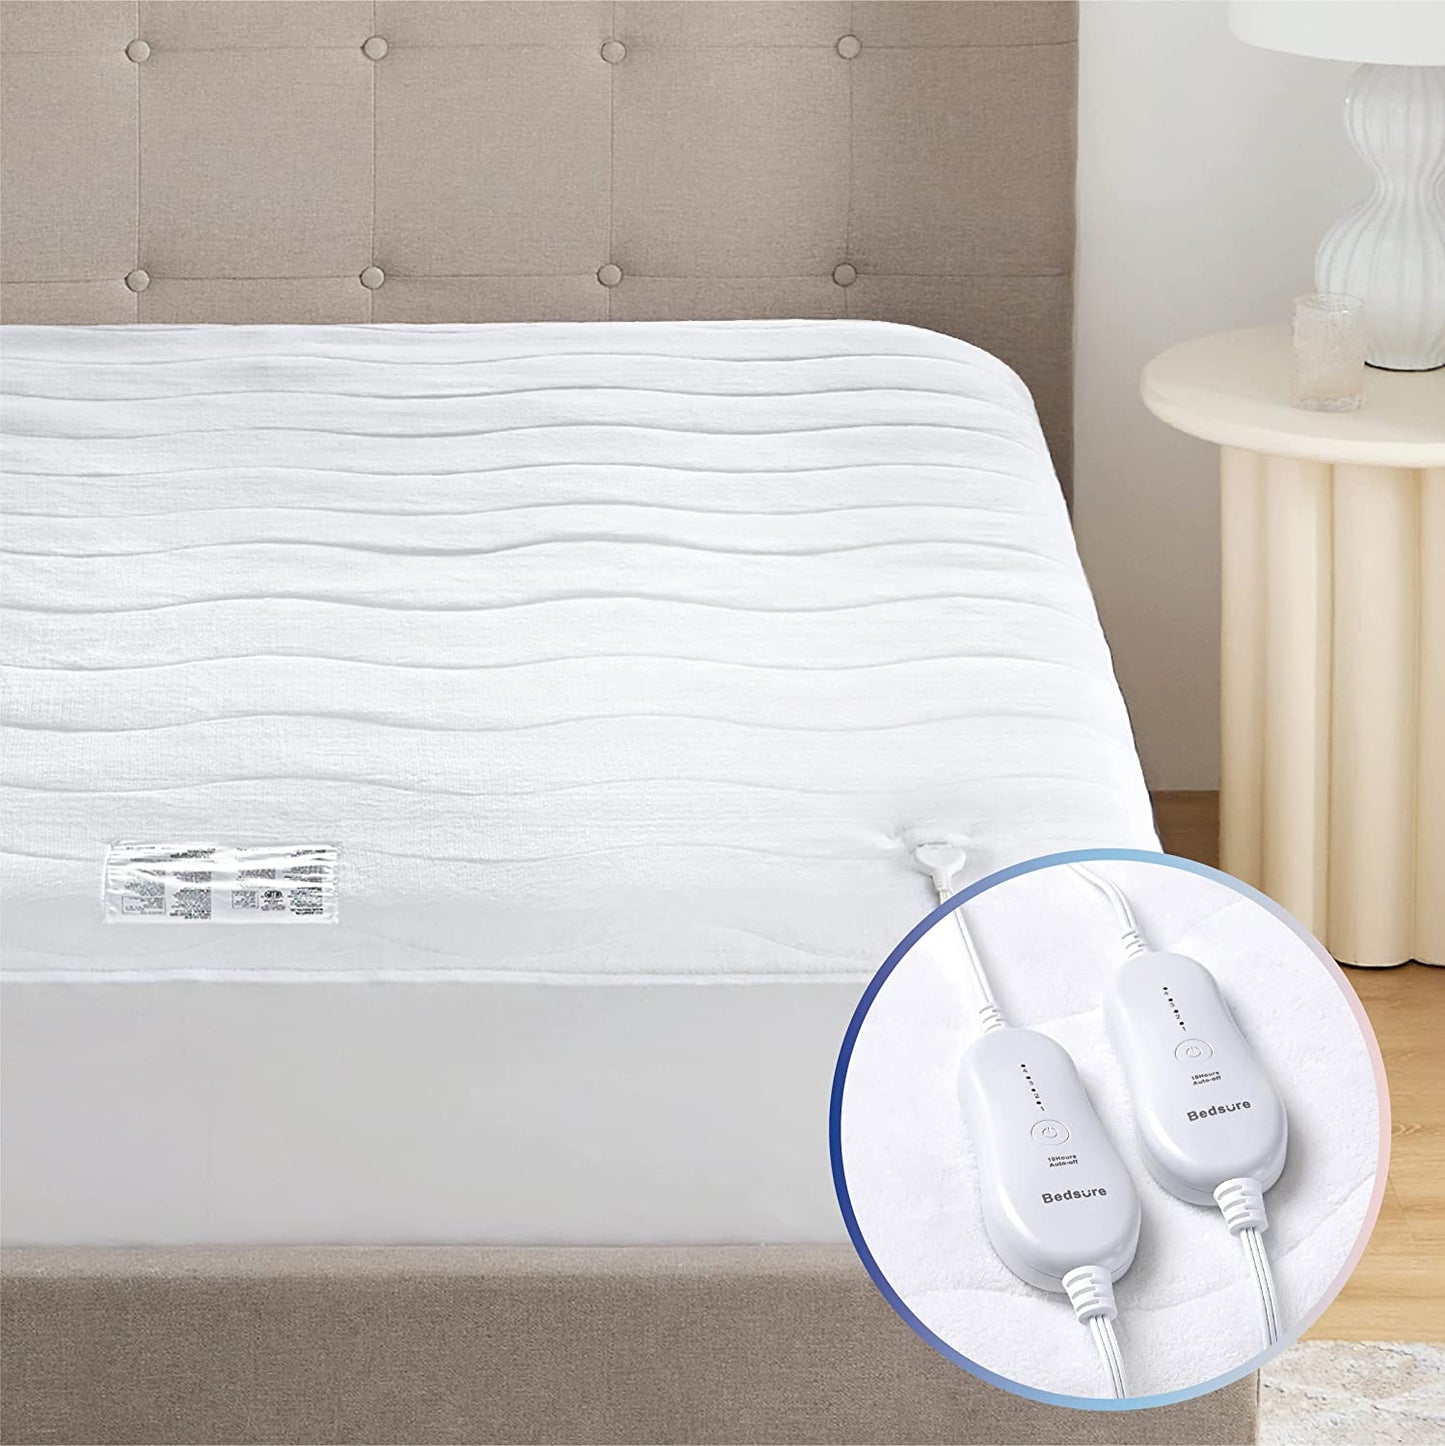 Bedsure Heated Mattress Pad Twin Size - Bed Warmer with Single Control and 4 Heat Settings, Coral Fleece Electric Mattress Pad with 10 Hr Timer & Auto Shut off (Twin, 39"X75")